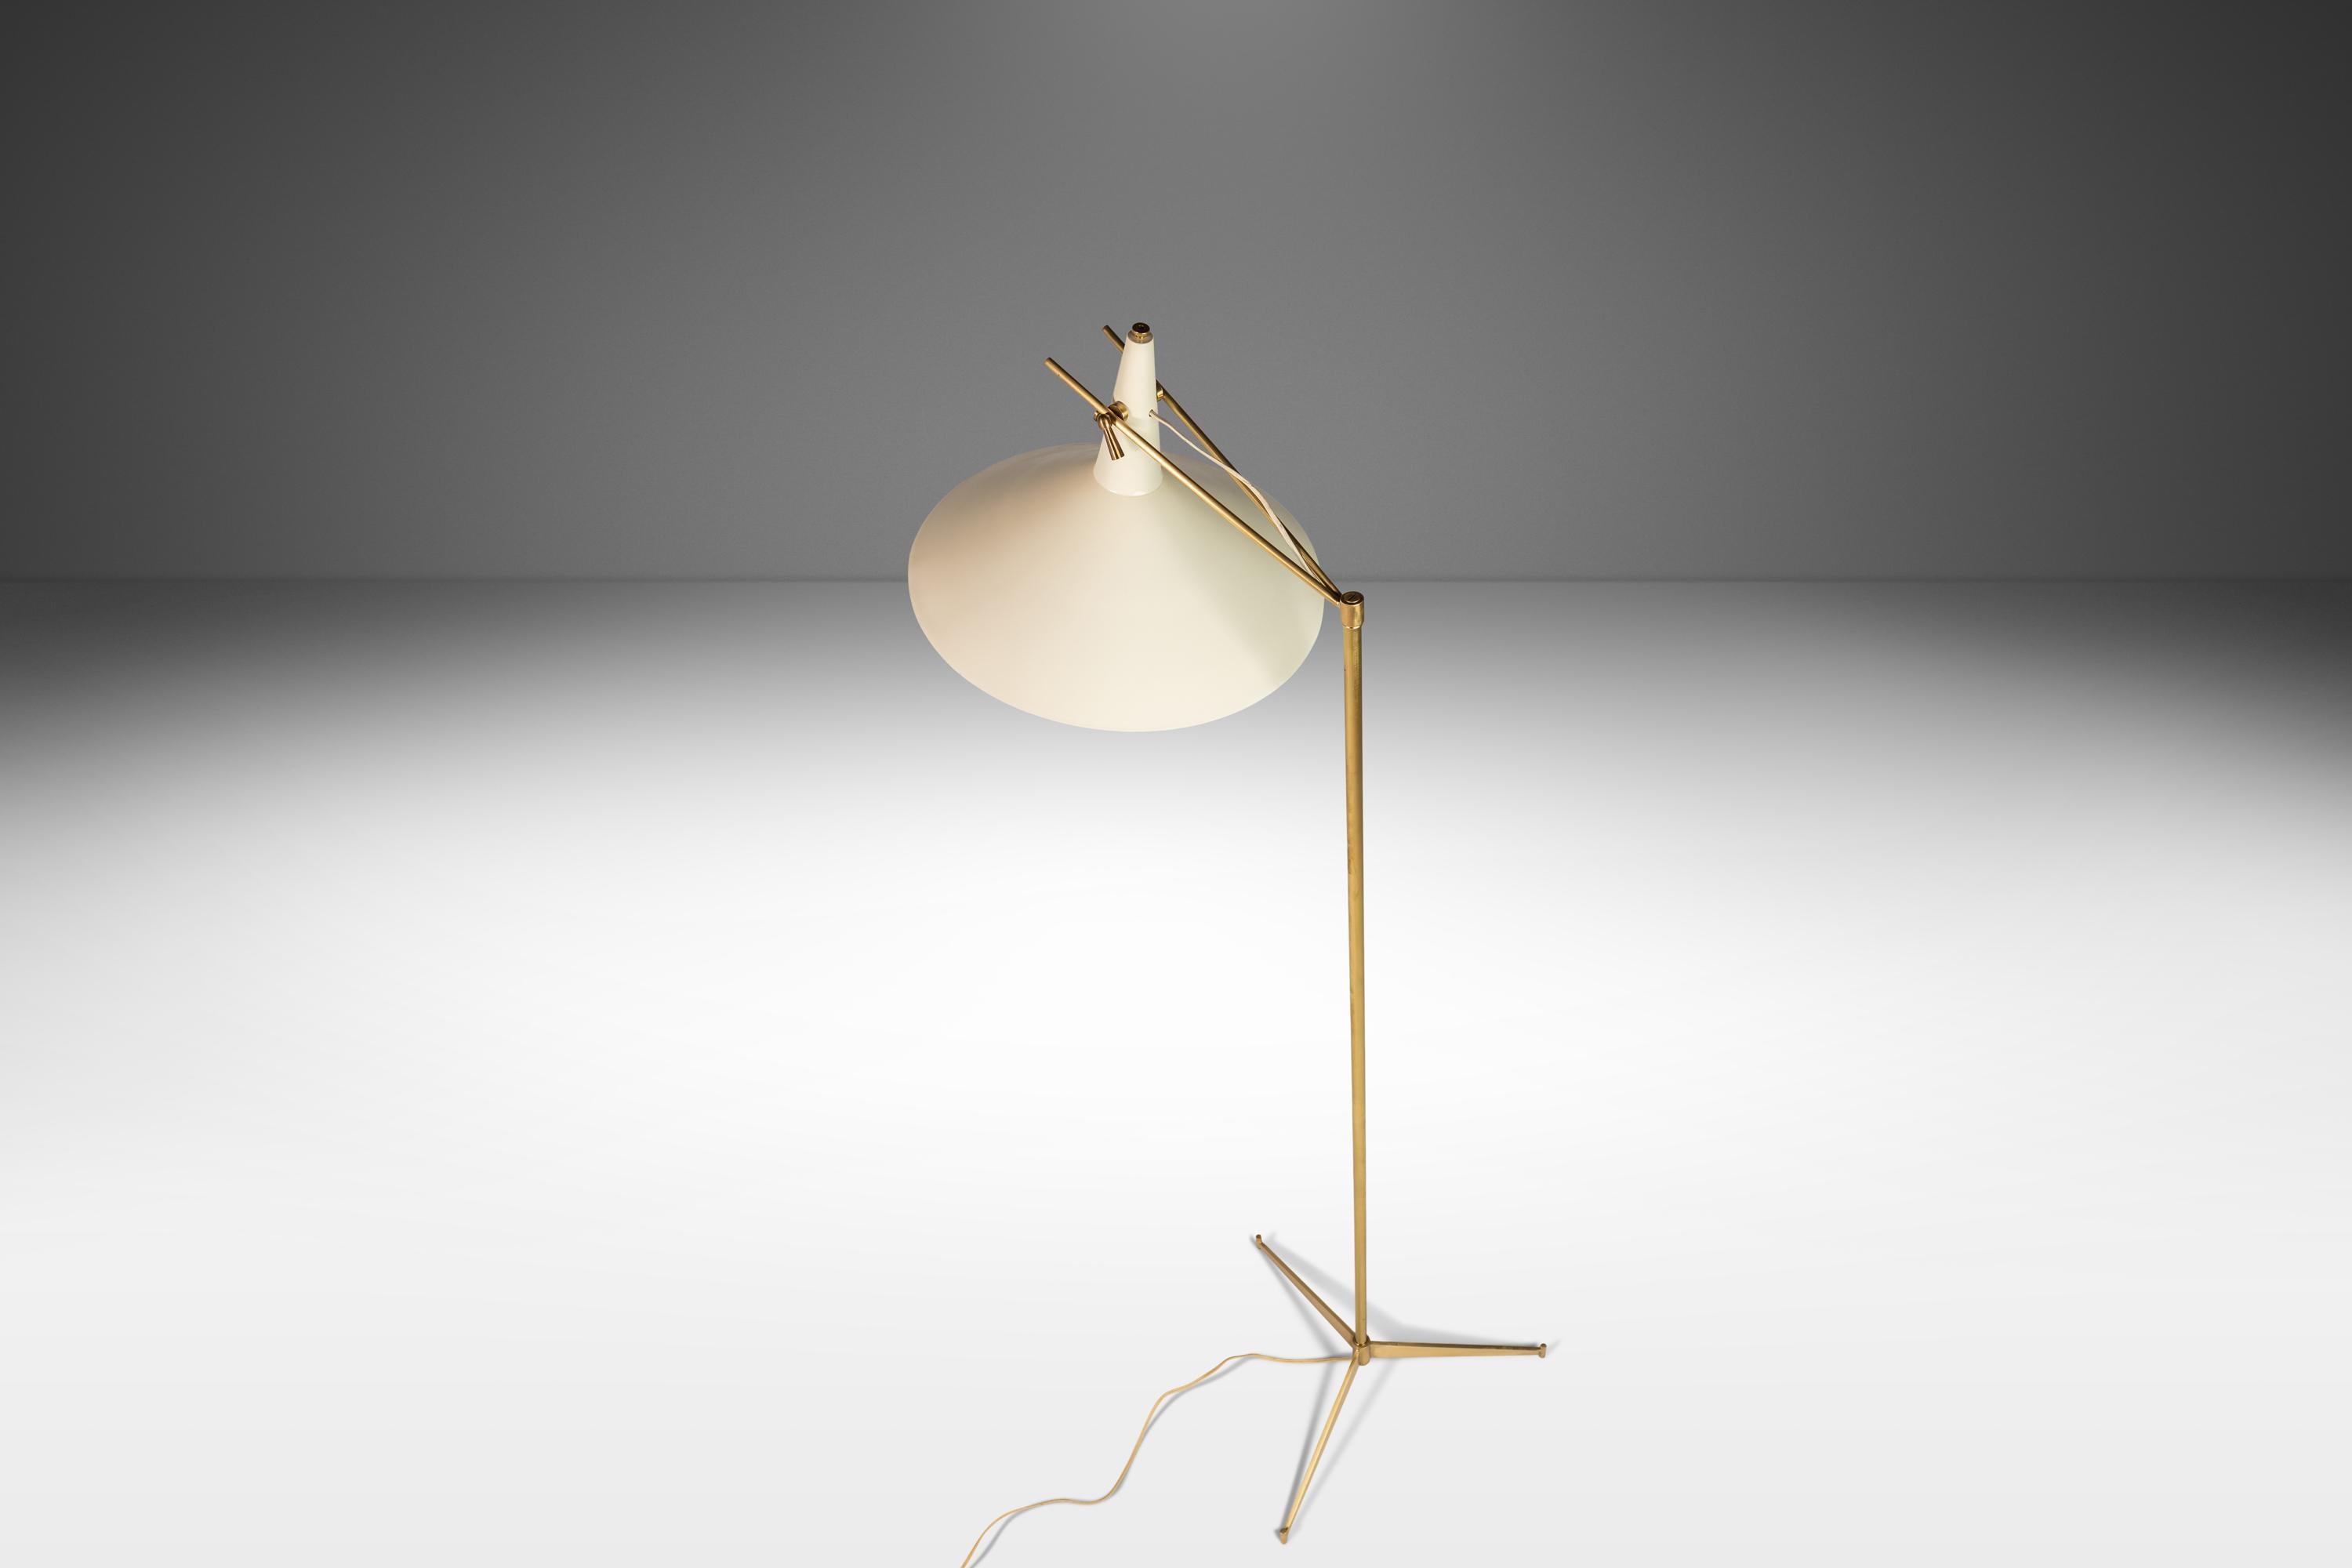 Mid-Century Model E-11 Floor Lamp by Paul McCobb for Directional, USA, c. 1950's For Sale 8